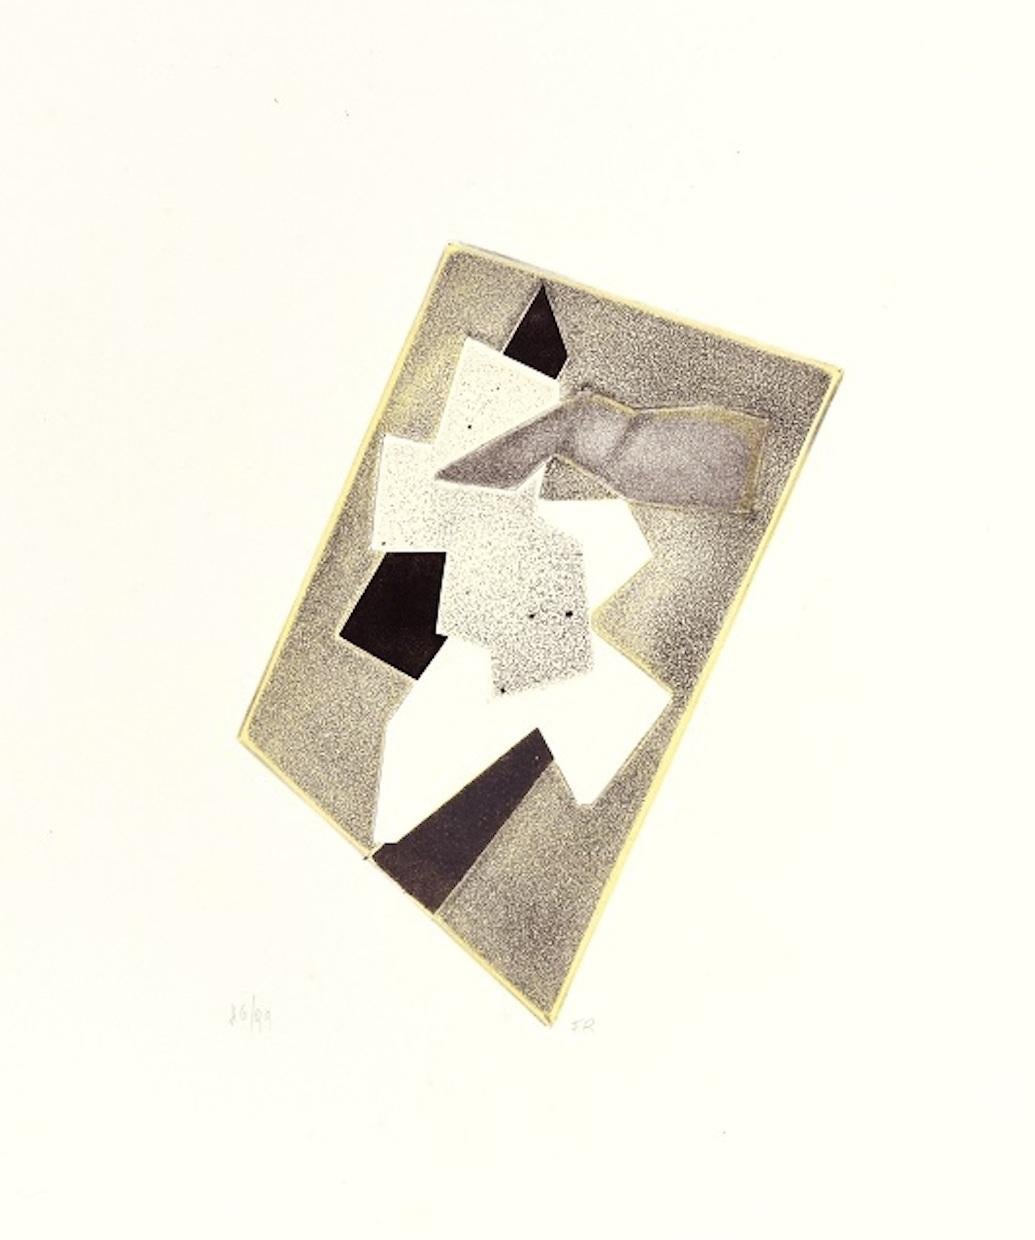 Abstract Composition - Original Etching and Aquatint by Hans Richter - 1970s